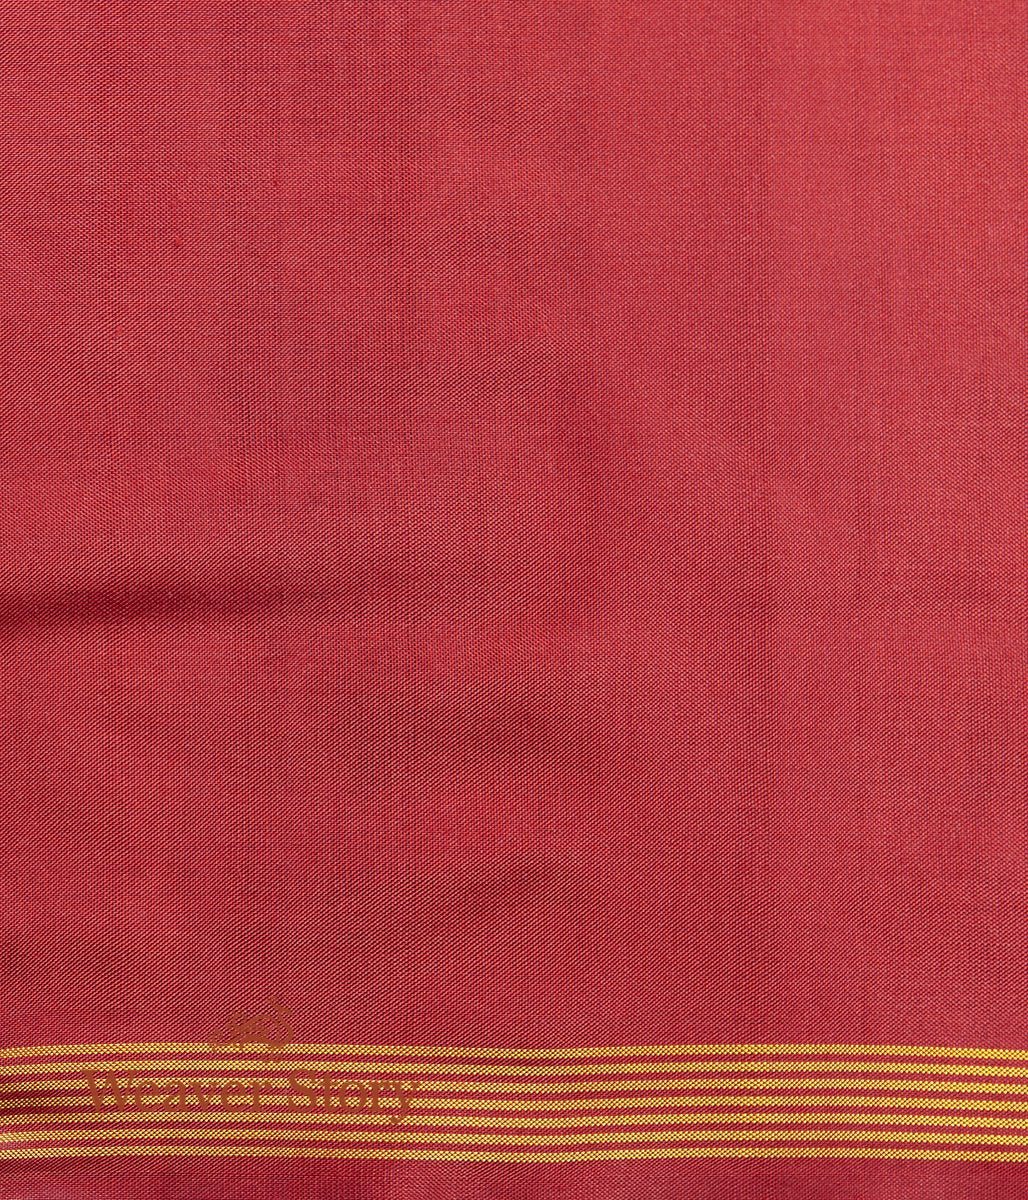 Handwoven_Blue_and_Red_Dual_Tone_Gujarat_Patola_Saree_with_Red_Border_WeaverStory_05